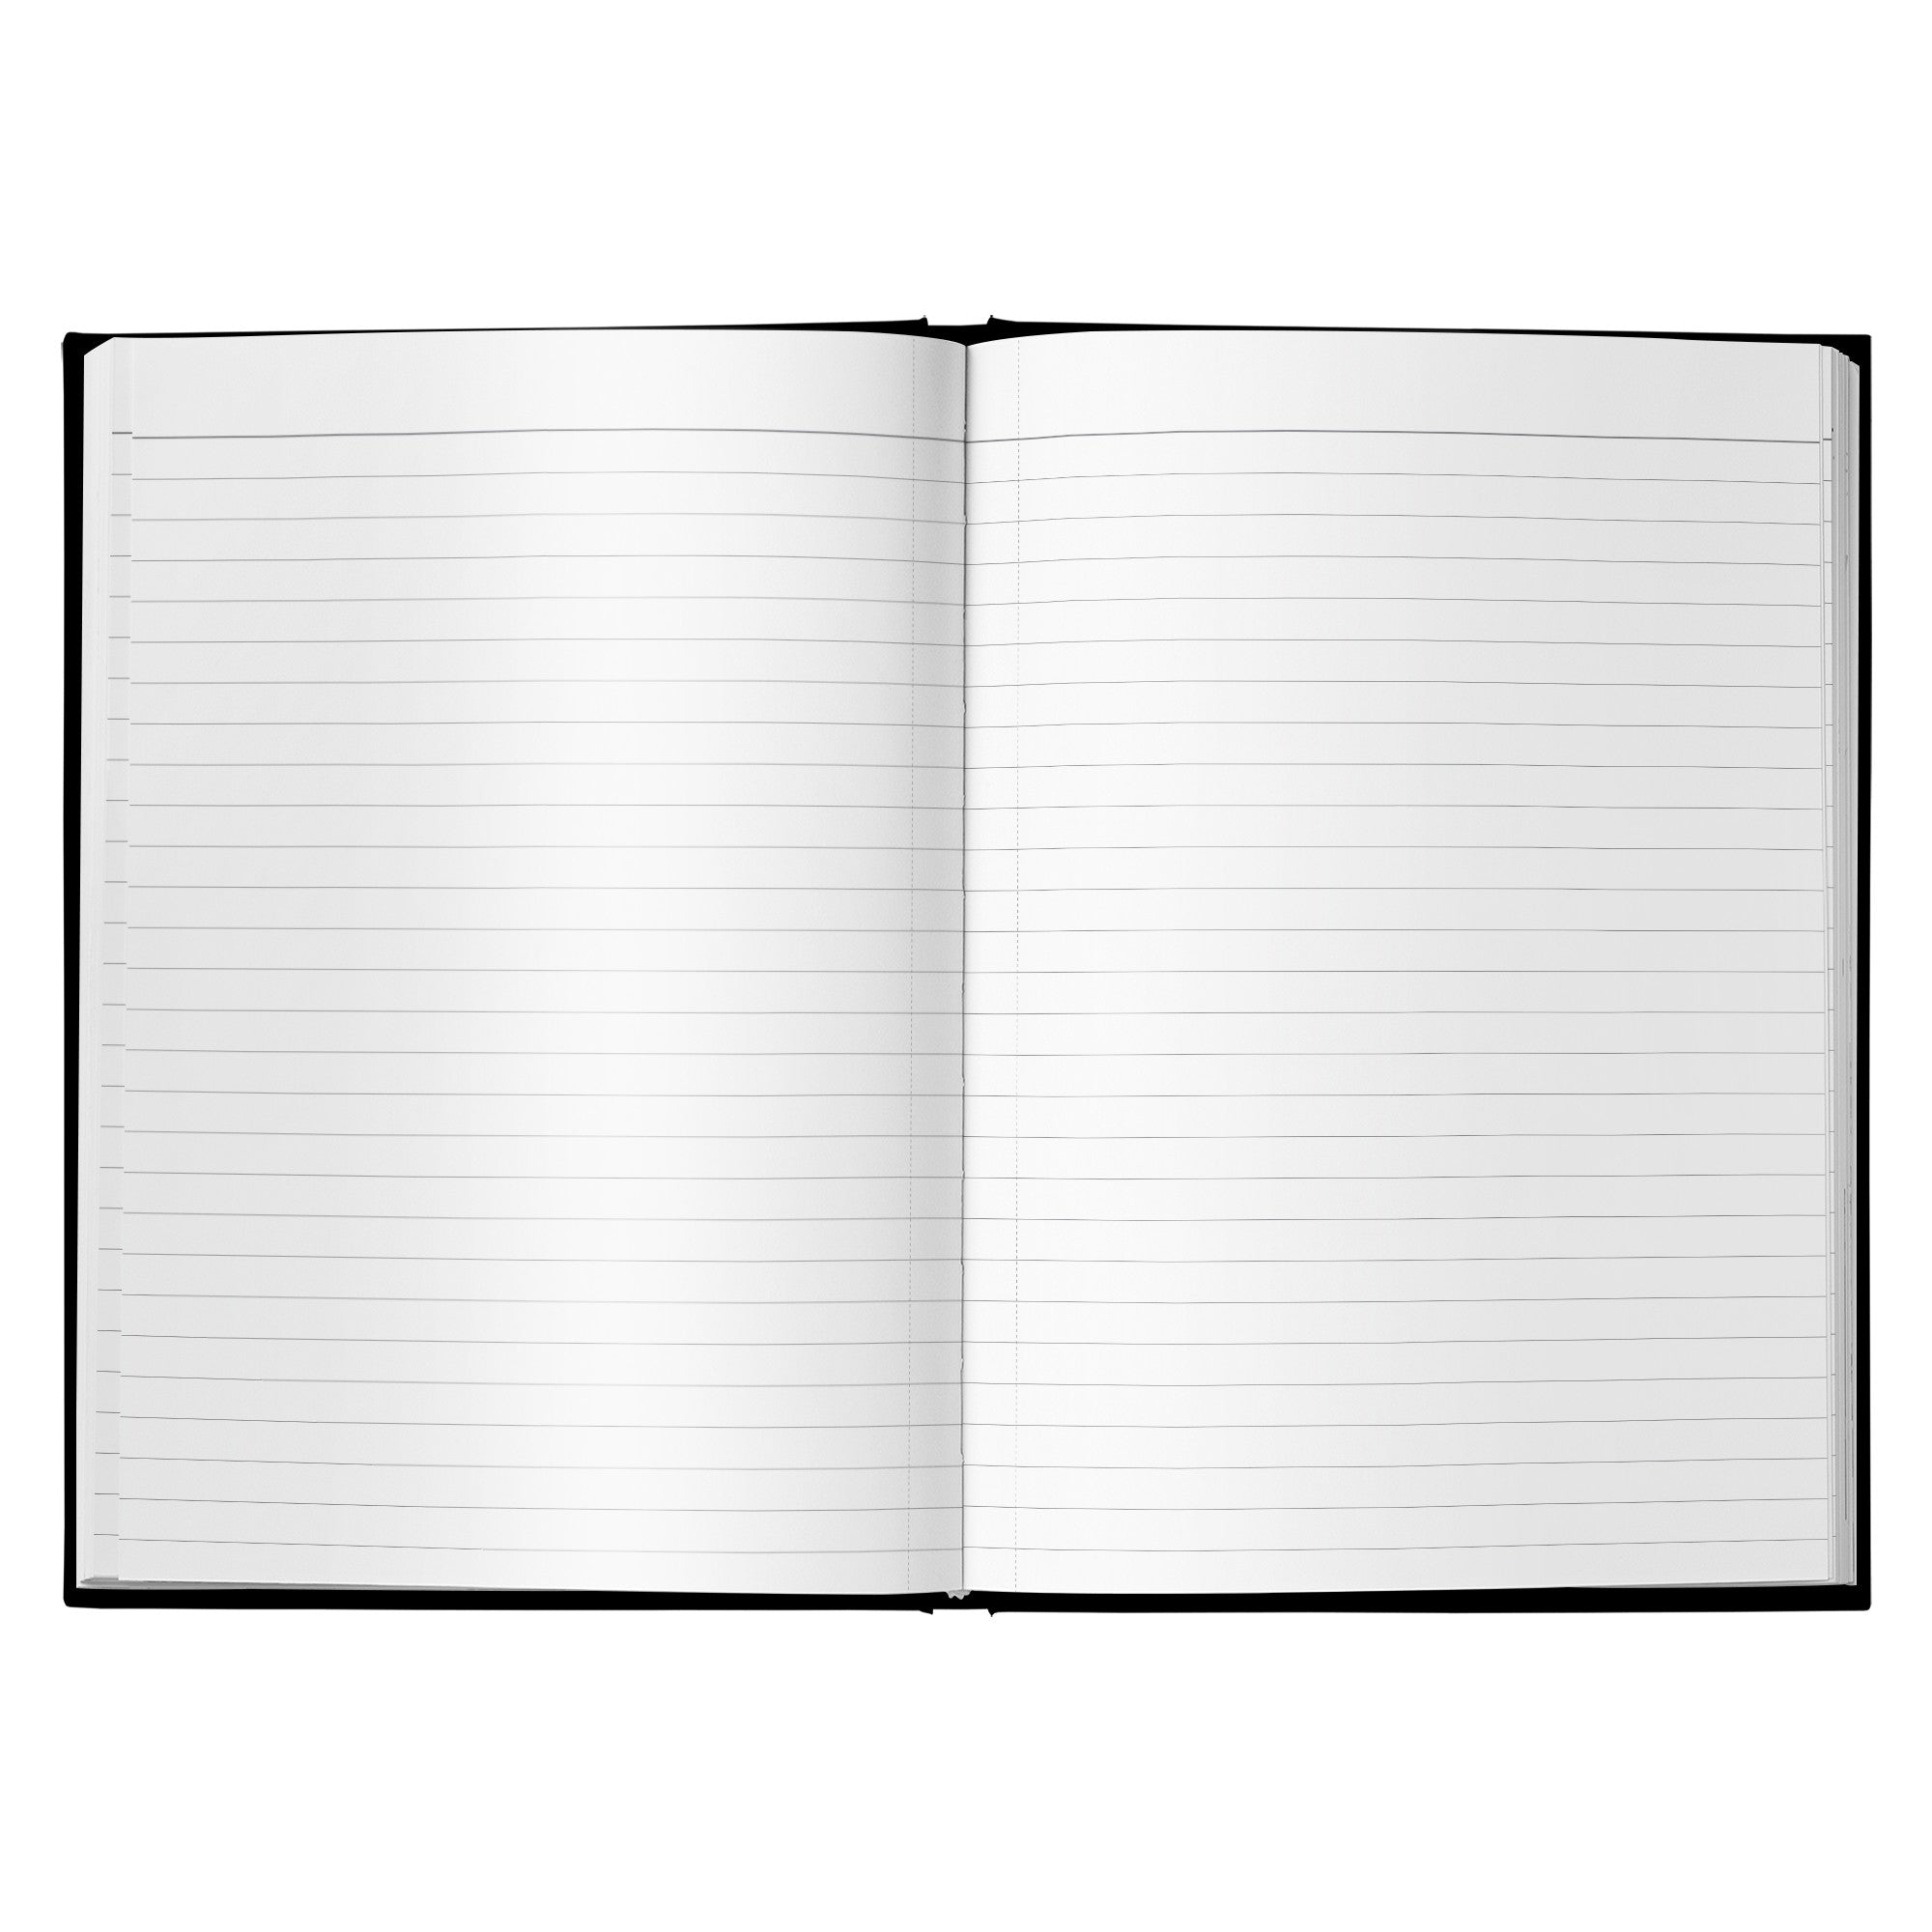 ASL I Love You Stripe Hand Hardcover Notebook - The Kindness Cause